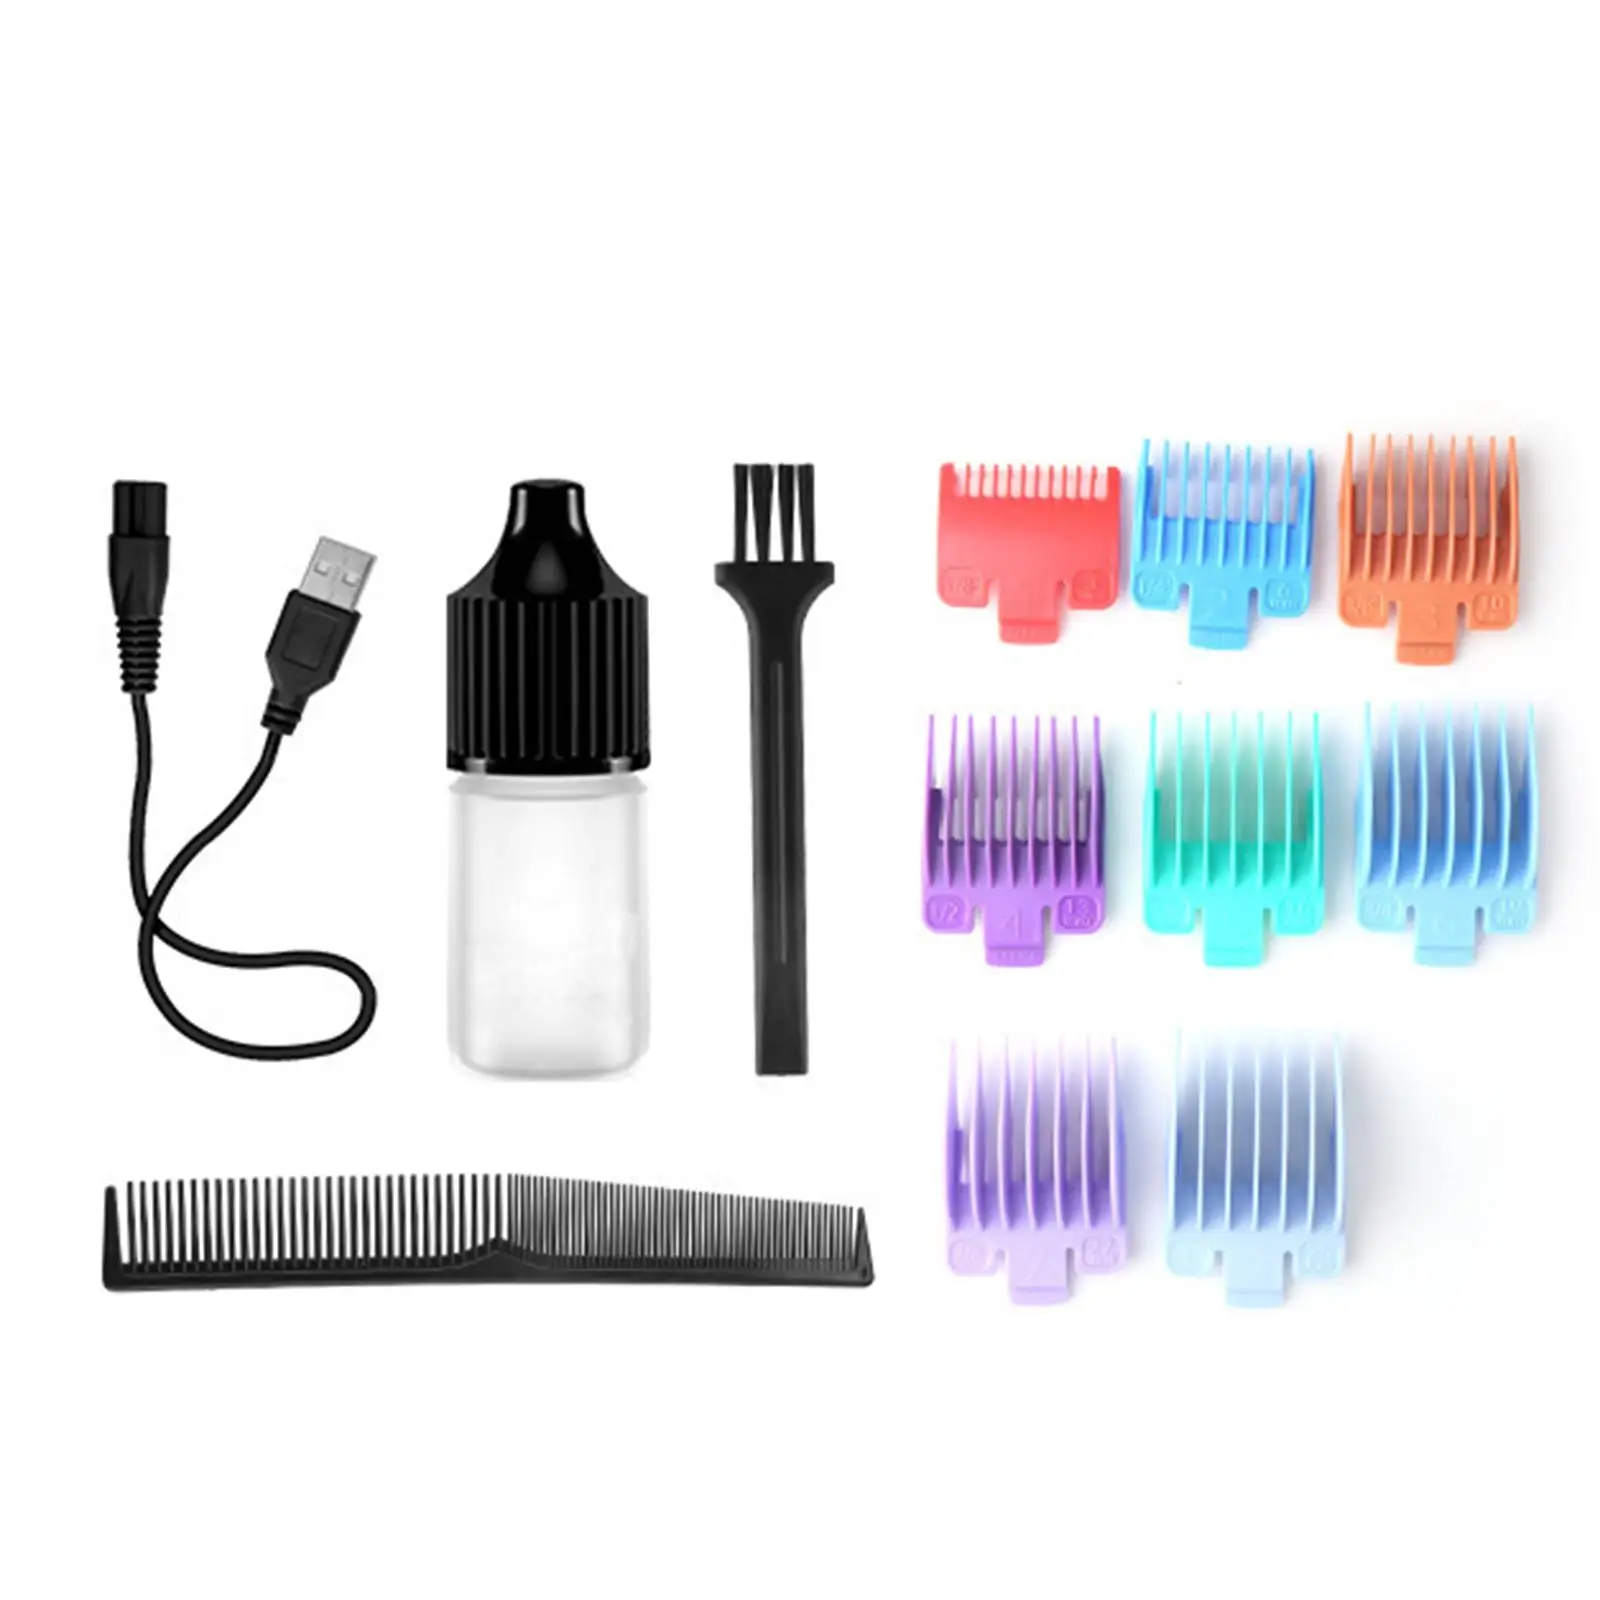 Electric Hair Clipper Hair Cutting Kit Grooming Graffiti Design for Home Use